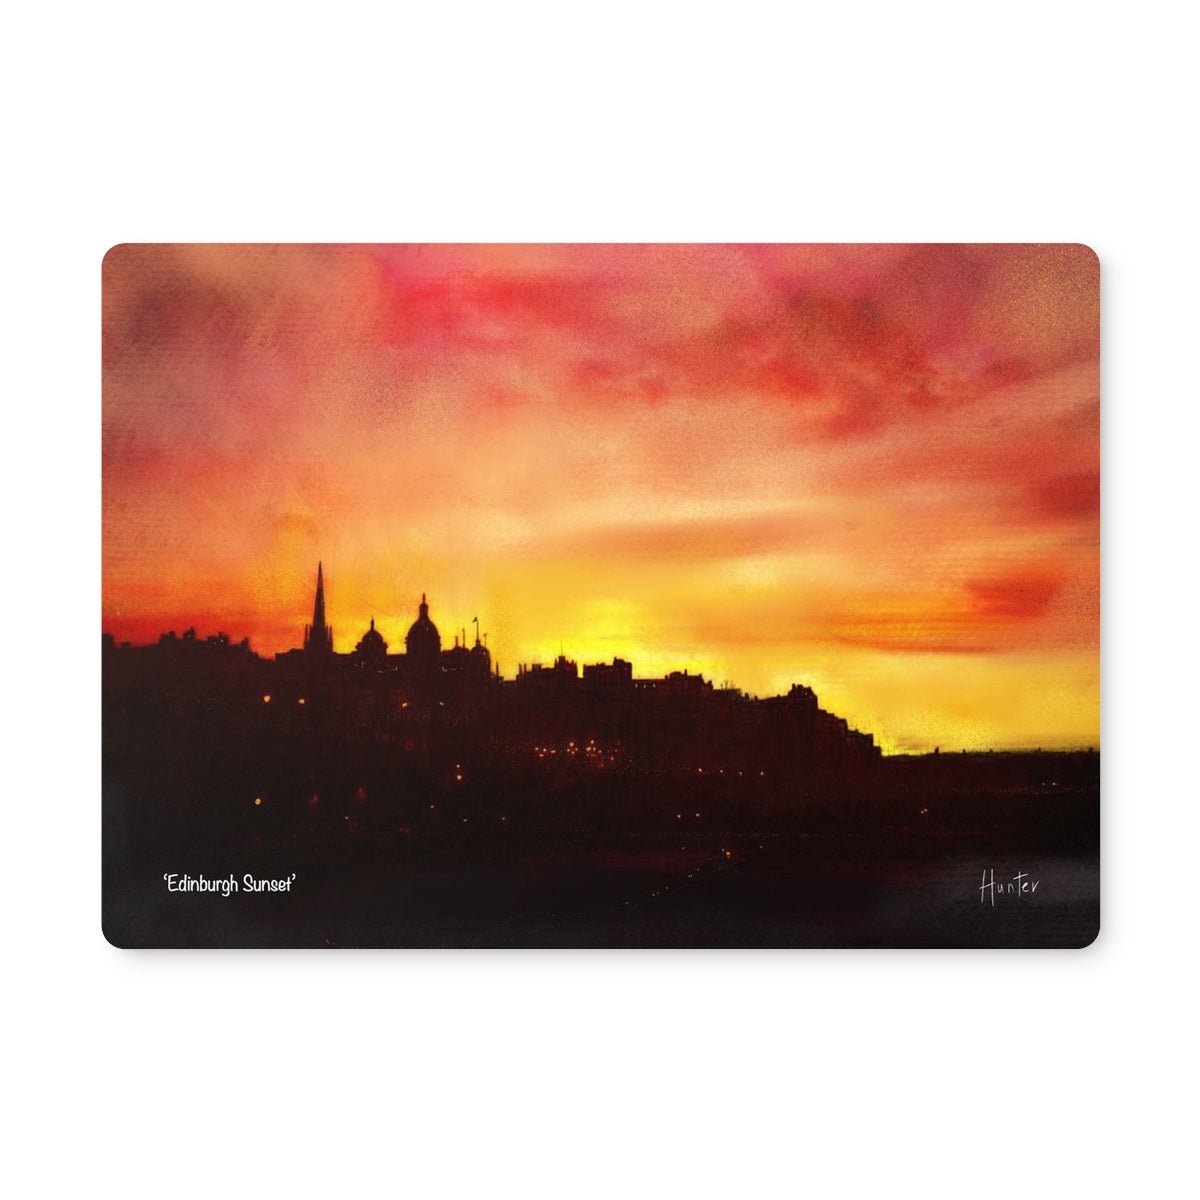 Edinburgh Sunset Art Gifts Placemat-Placemats-Edinburgh & Glasgow Art Gallery-Single Placemat-Paintings, Prints, Homeware, Art Gifts From Scotland By Scottish Artist Kevin Hunter